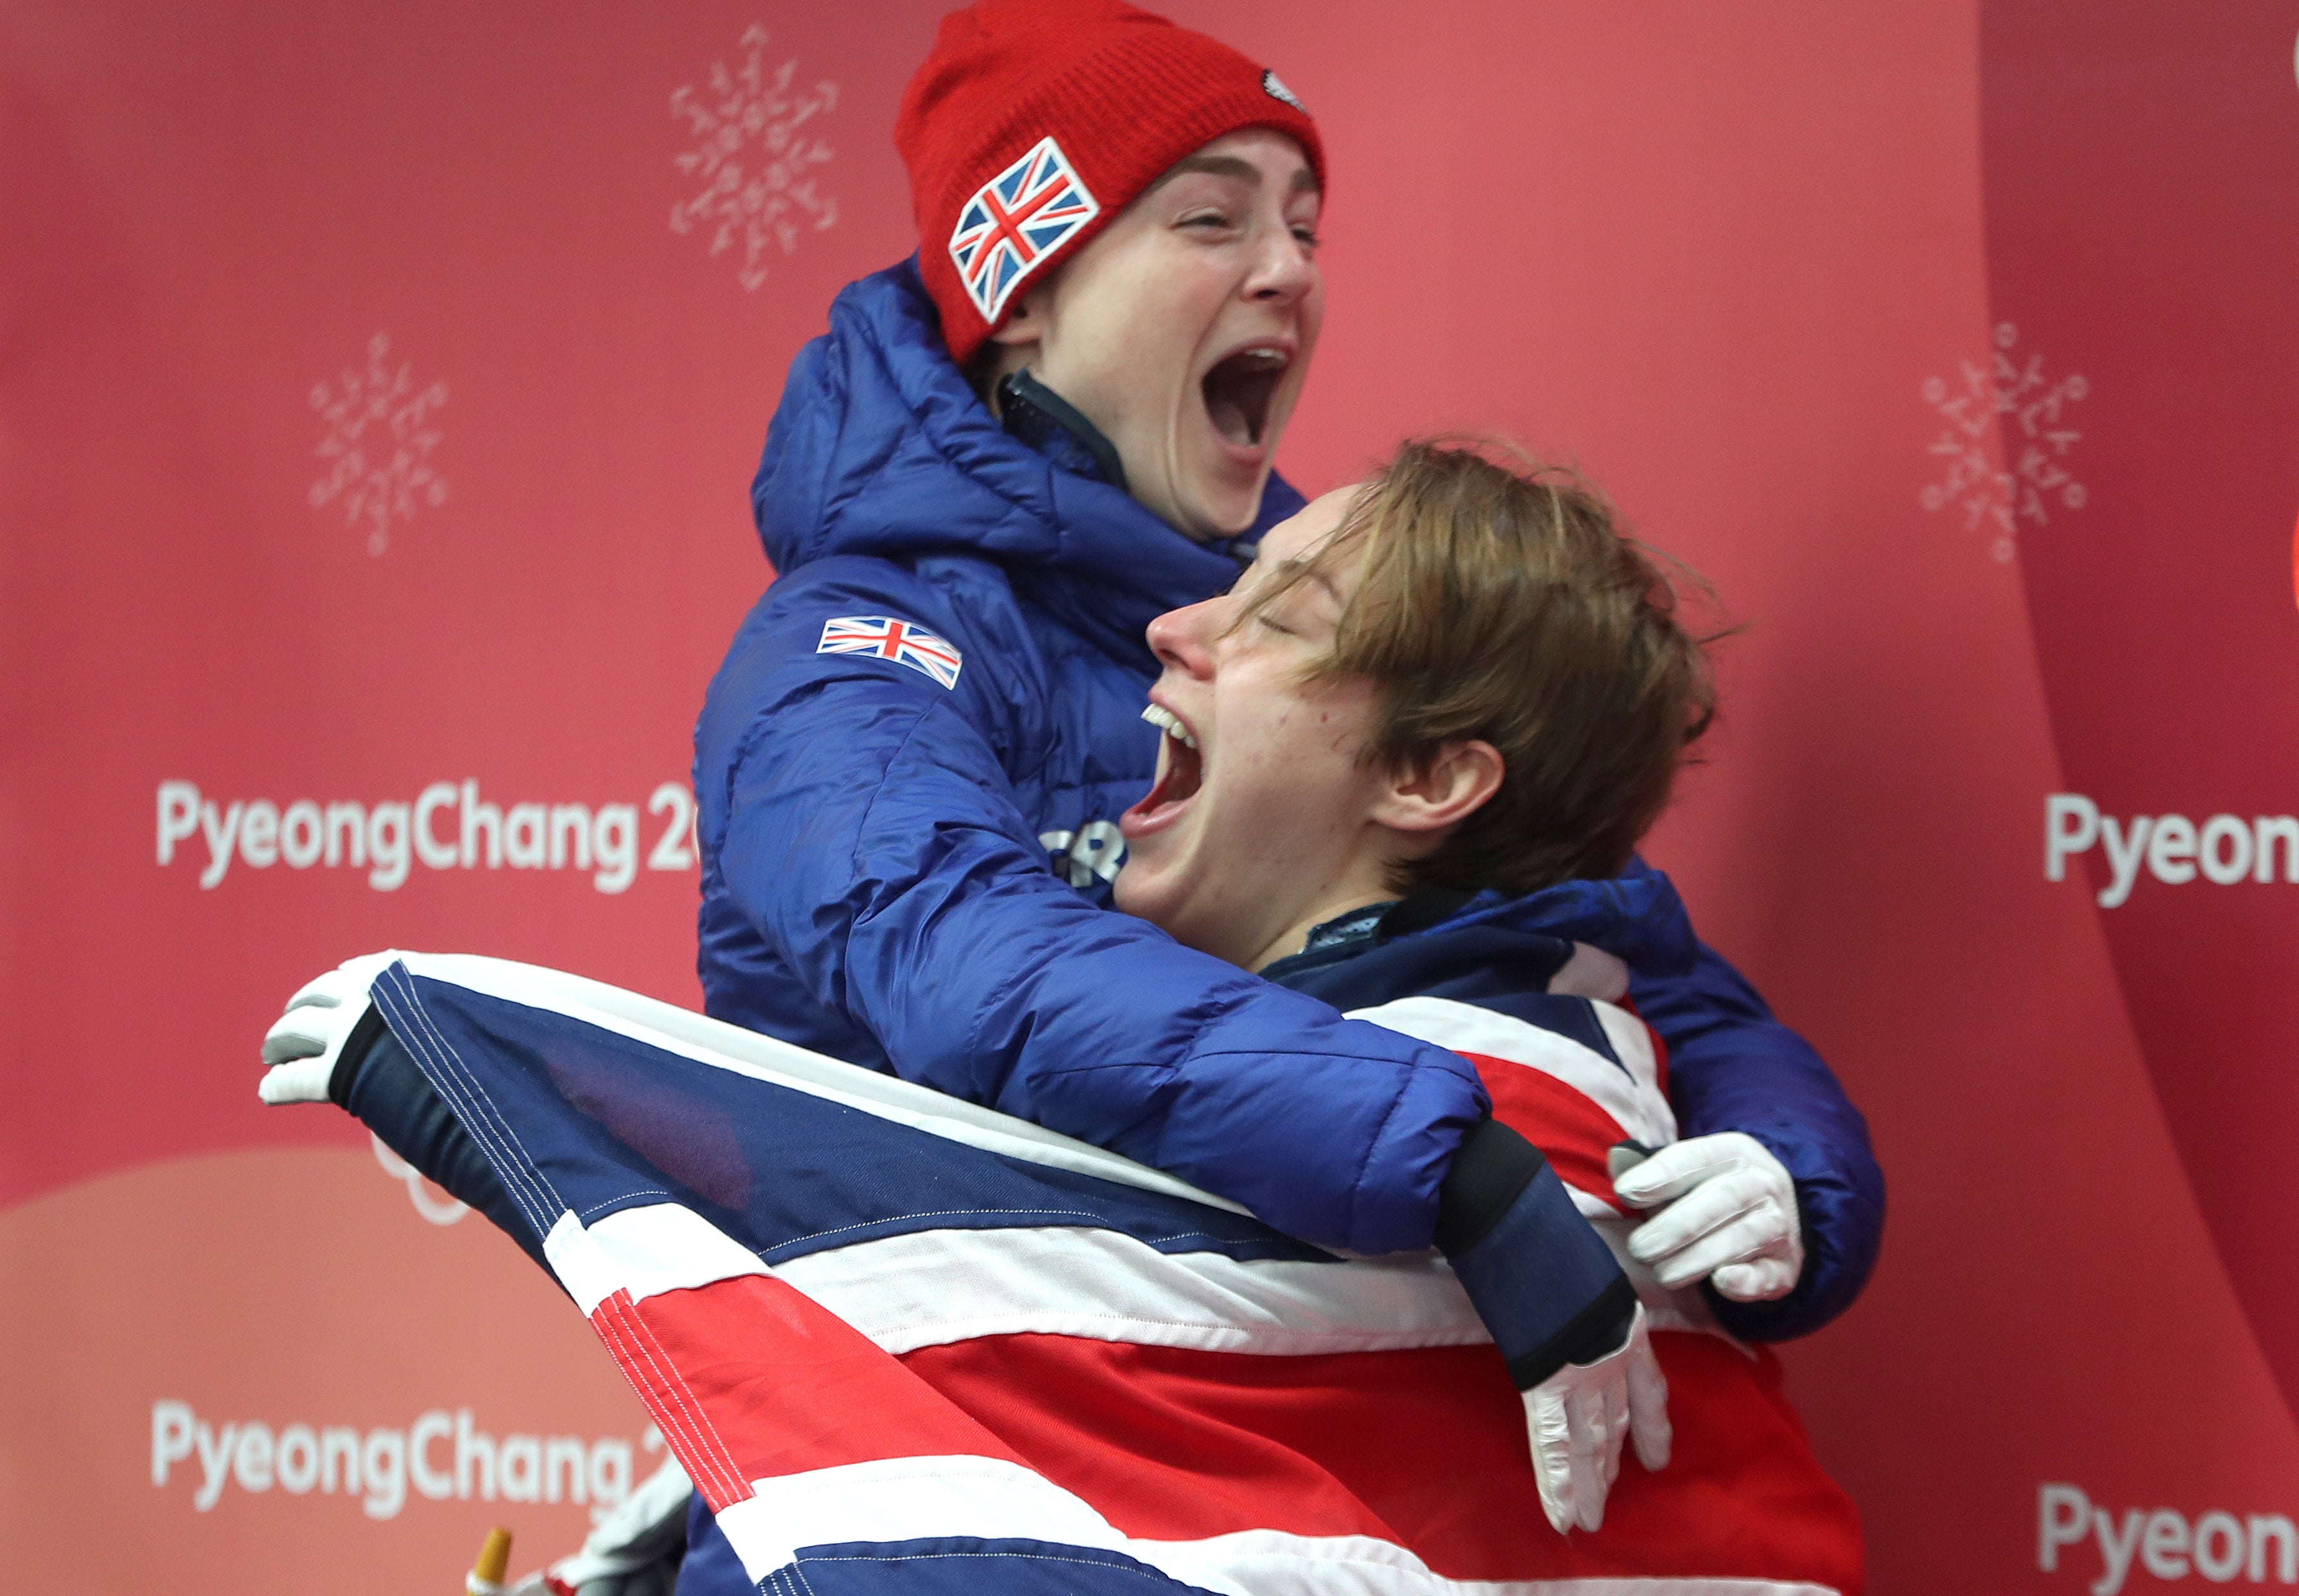 Lizzy Yarnold (right) and Laura Deas shared the podium in Pyeongchang